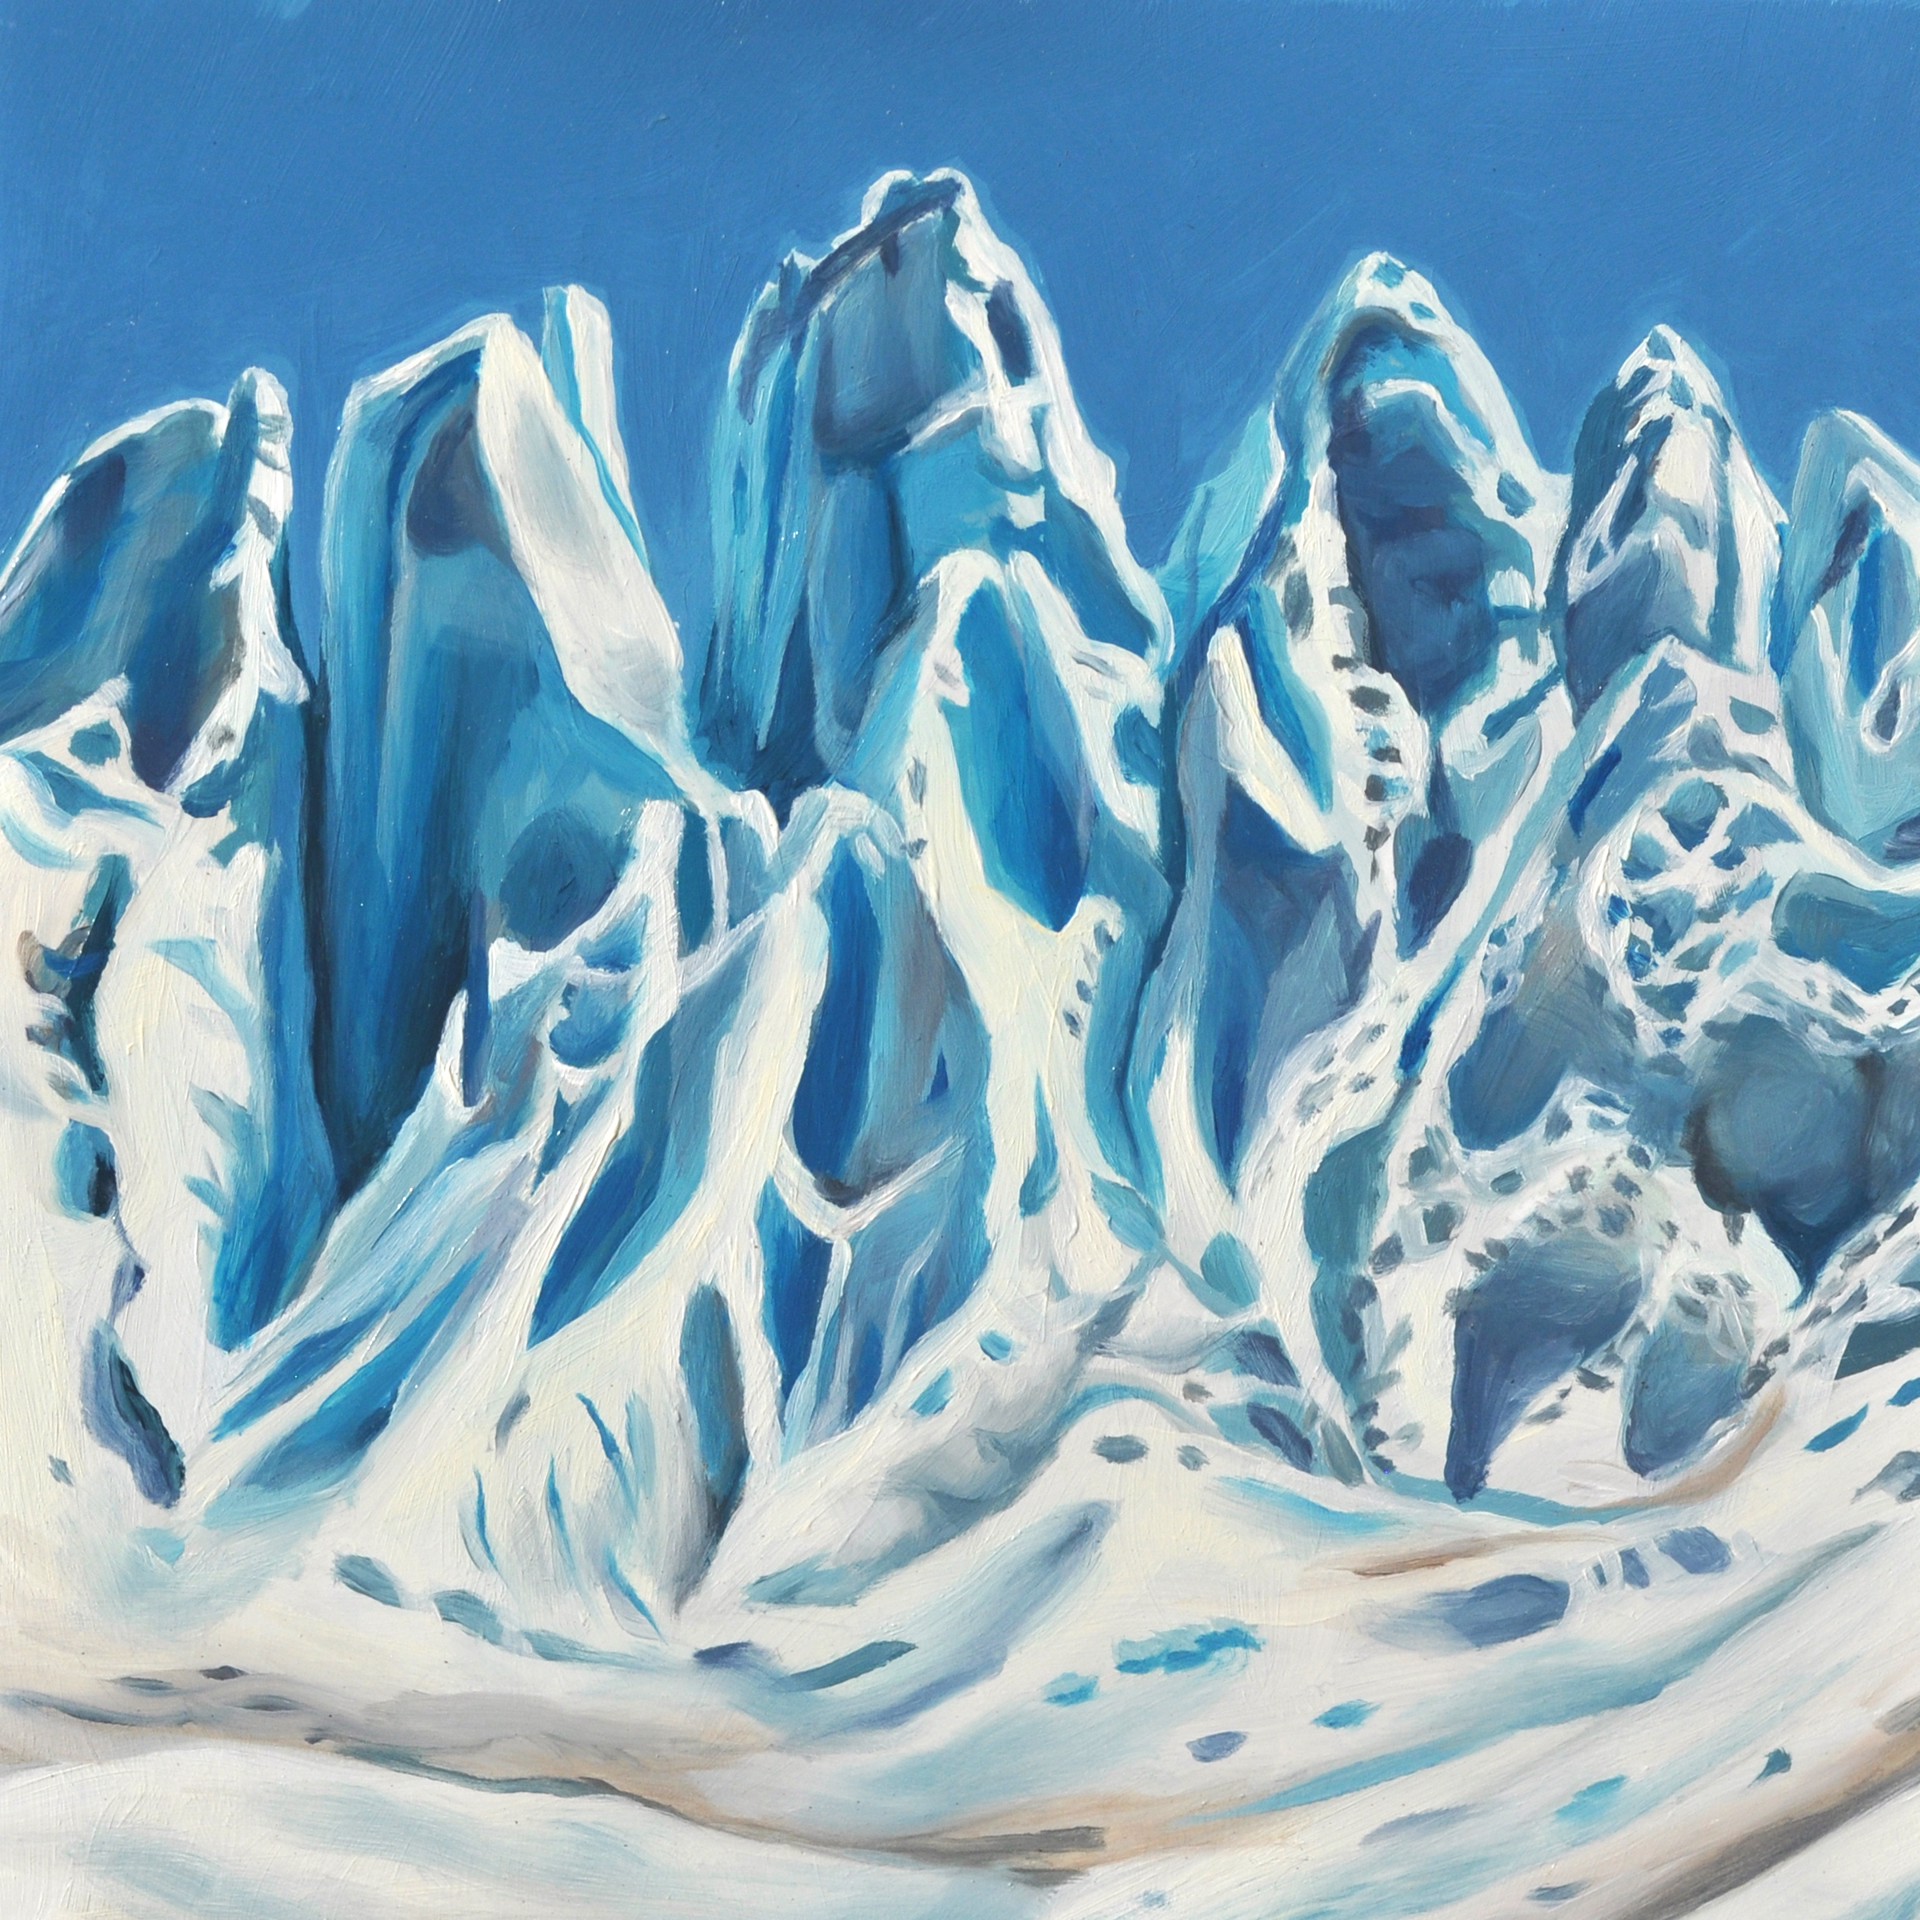 Peaks of Ice by Robin Hextrum